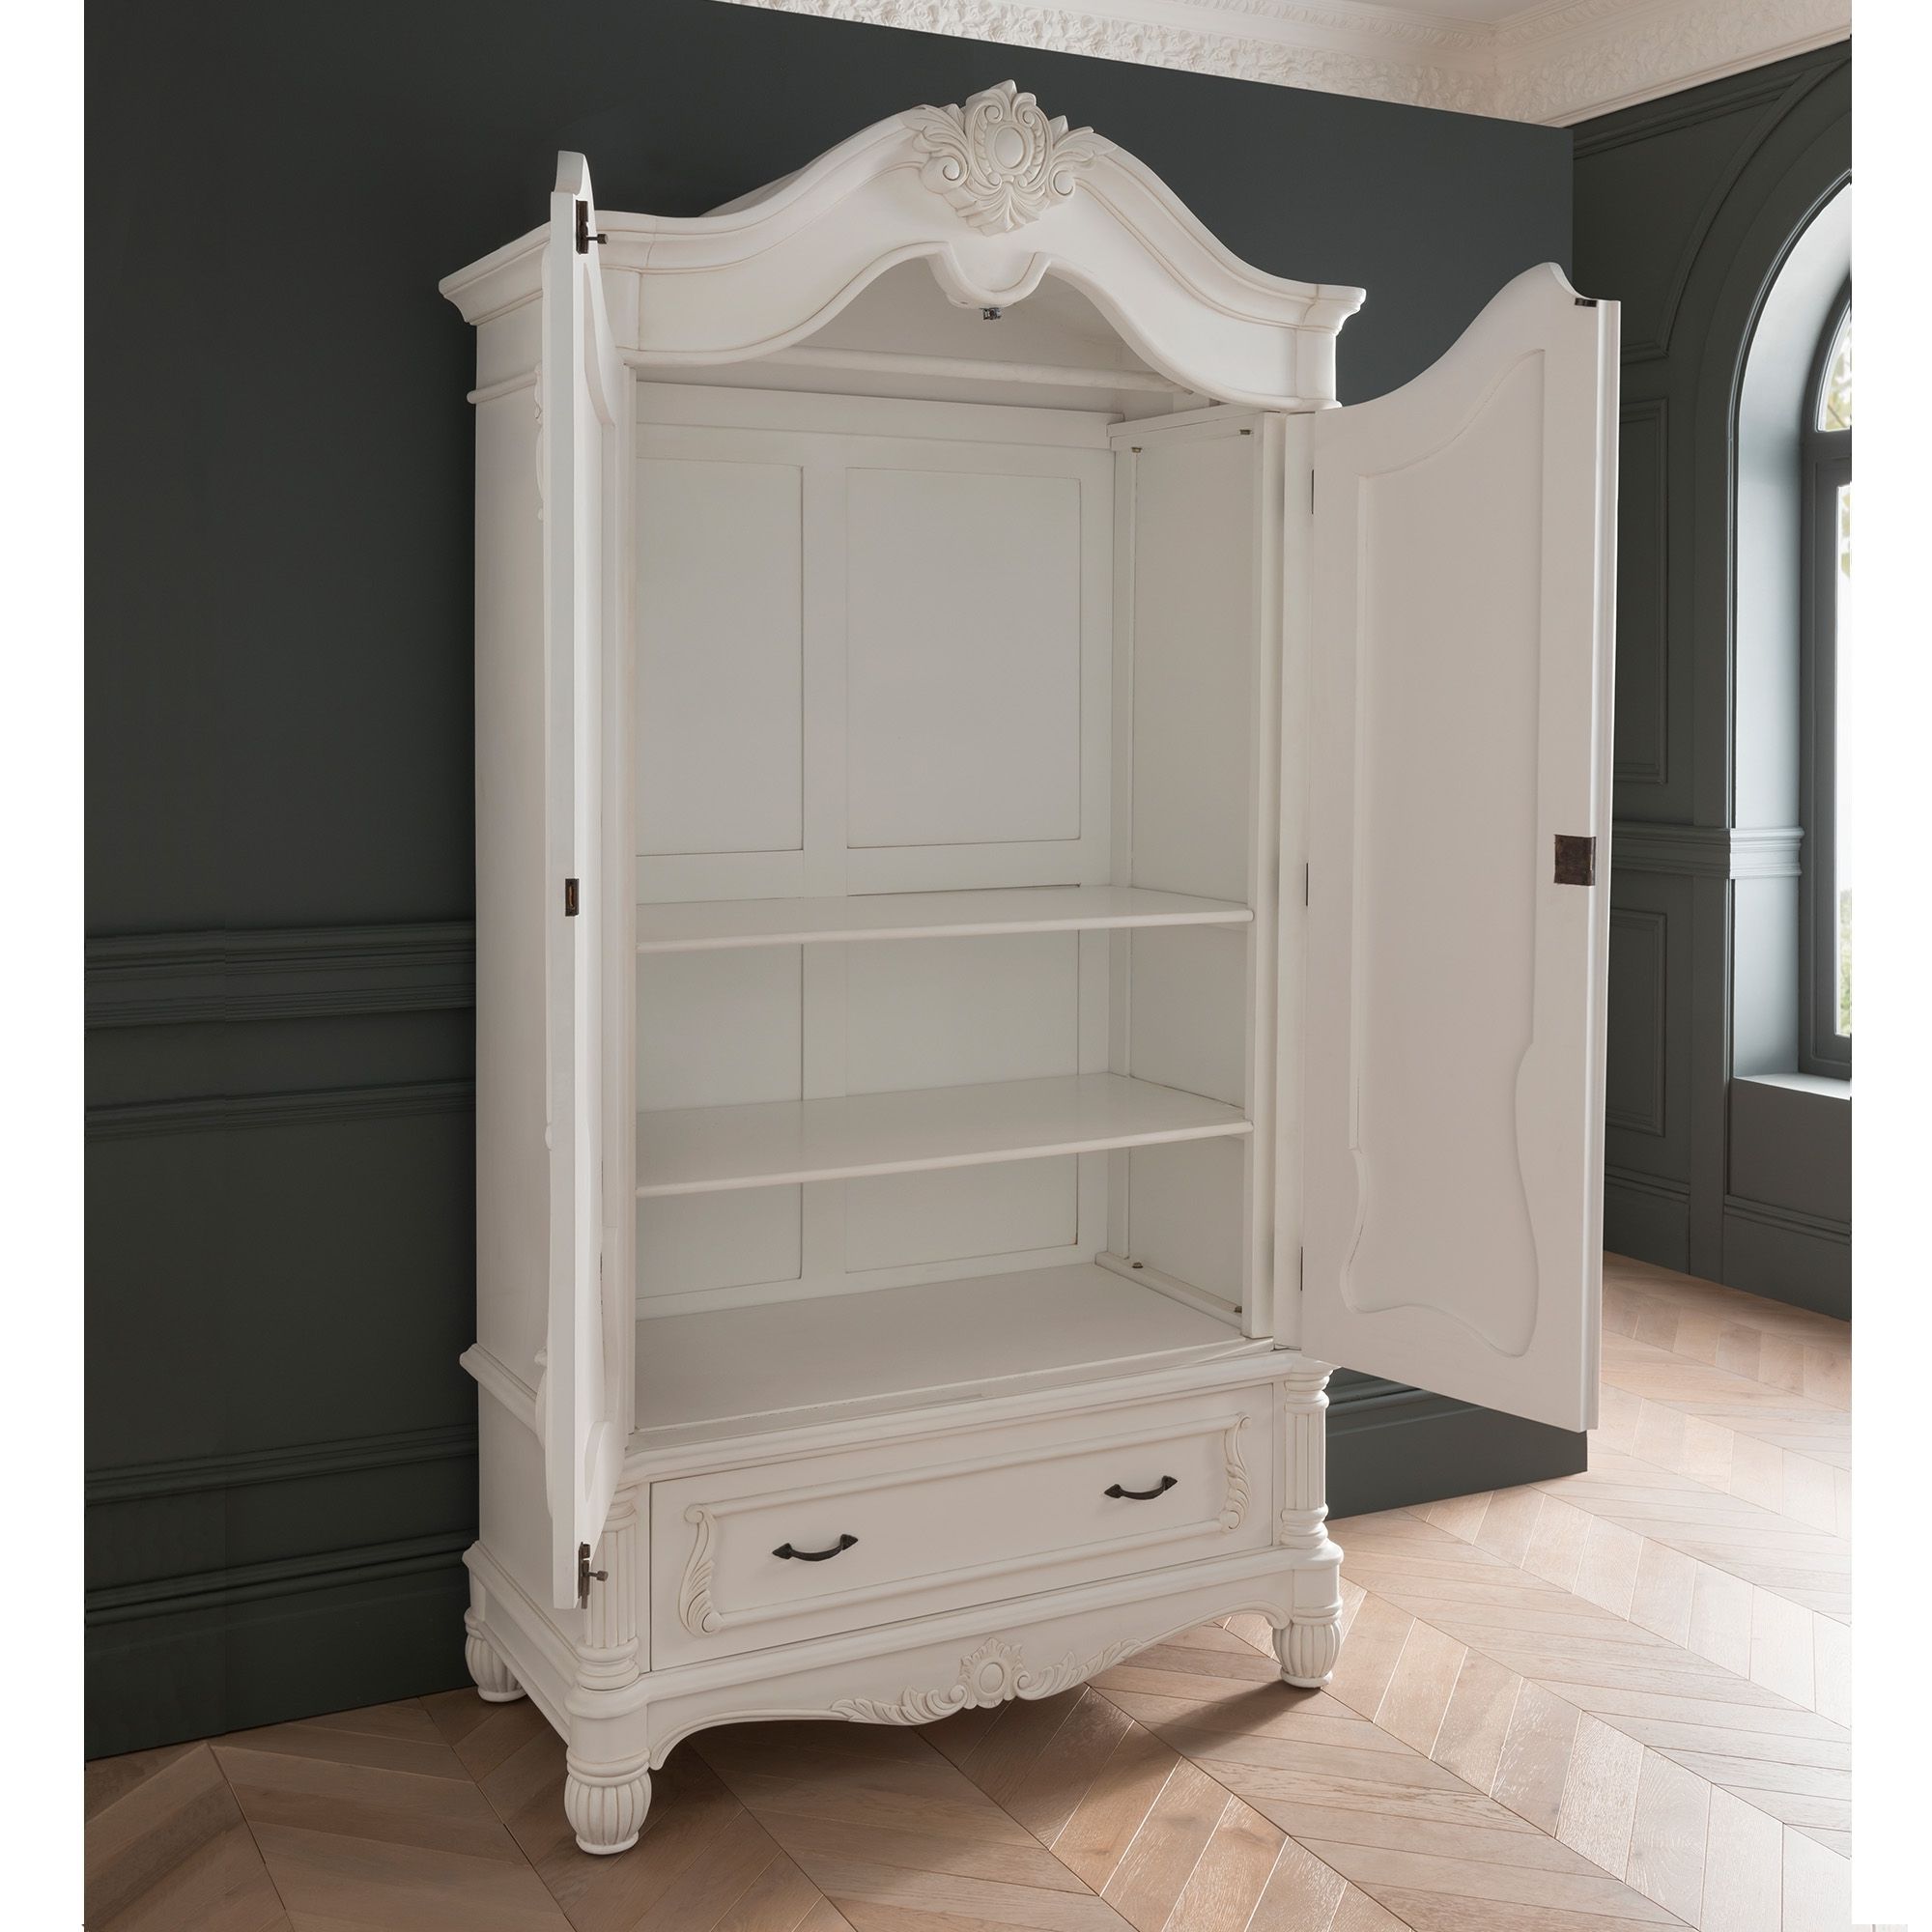 Antique French Style White Finished 1 Drawer Wardrobe | Homesdirect365 In Single French Wardrobes (Gallery 6 of 20)